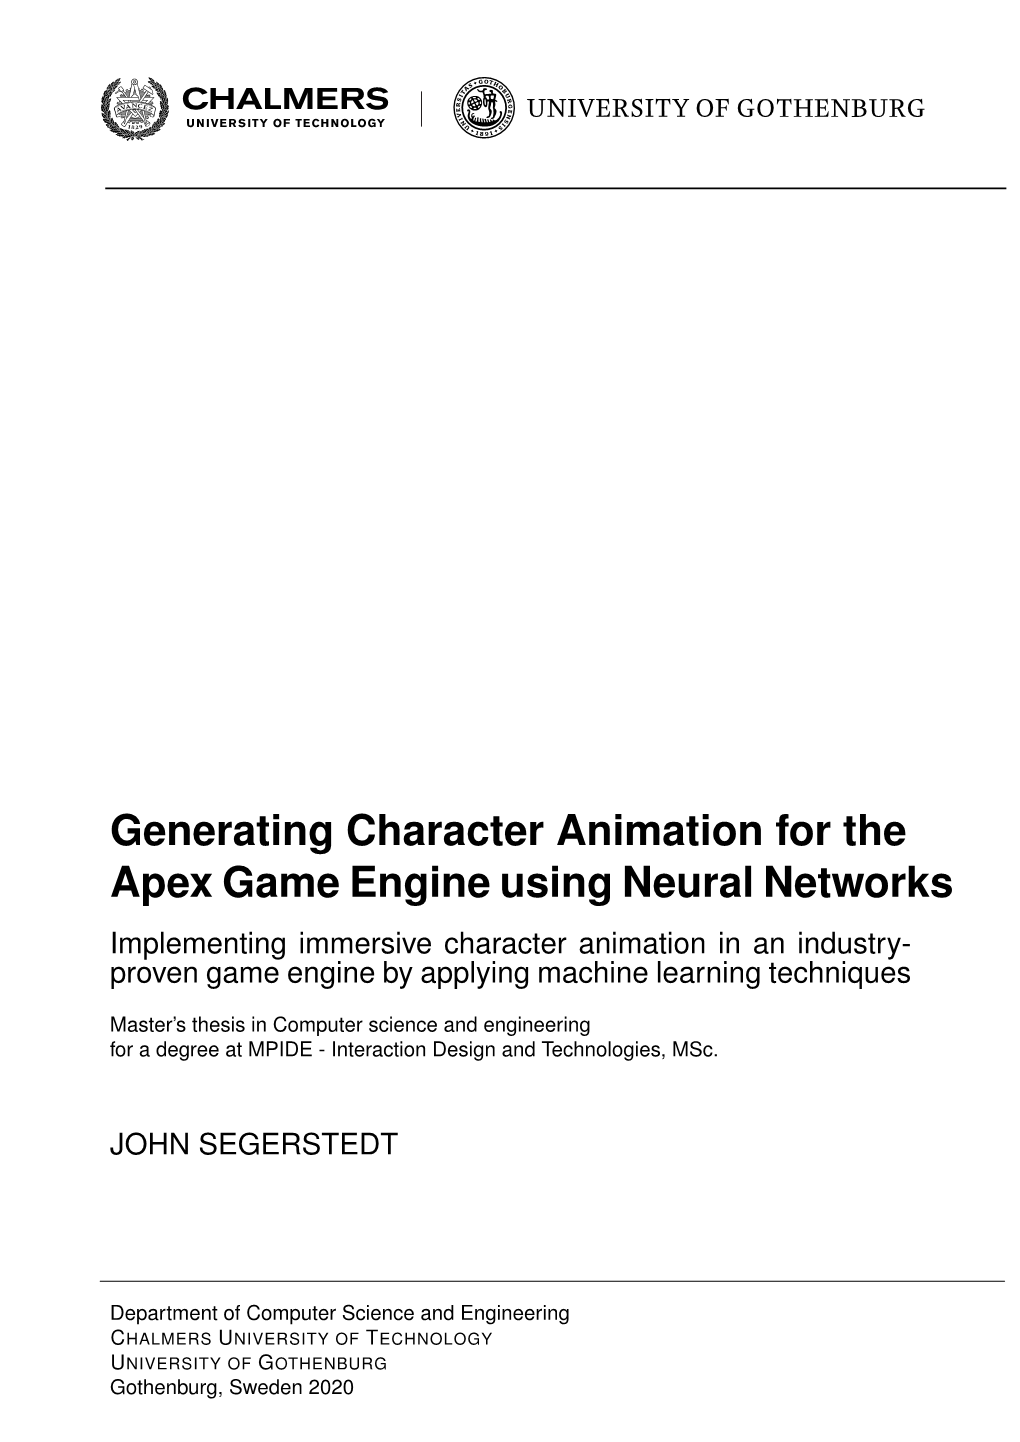 Generating Character Animation for the Apex Game Engine Using